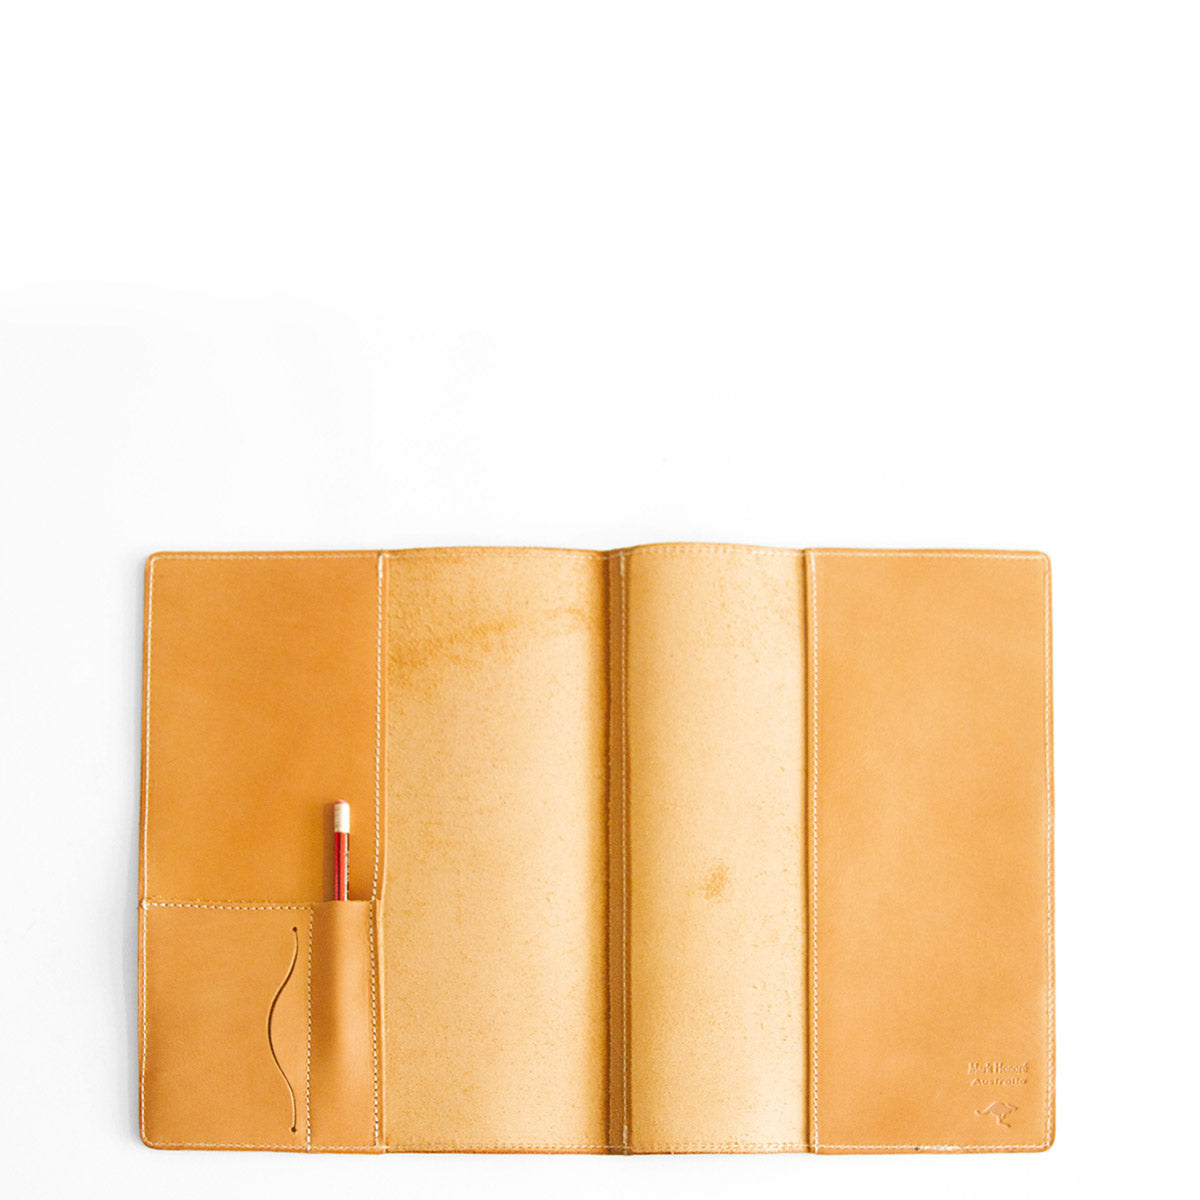 Swags A4 Book Cover - Tan